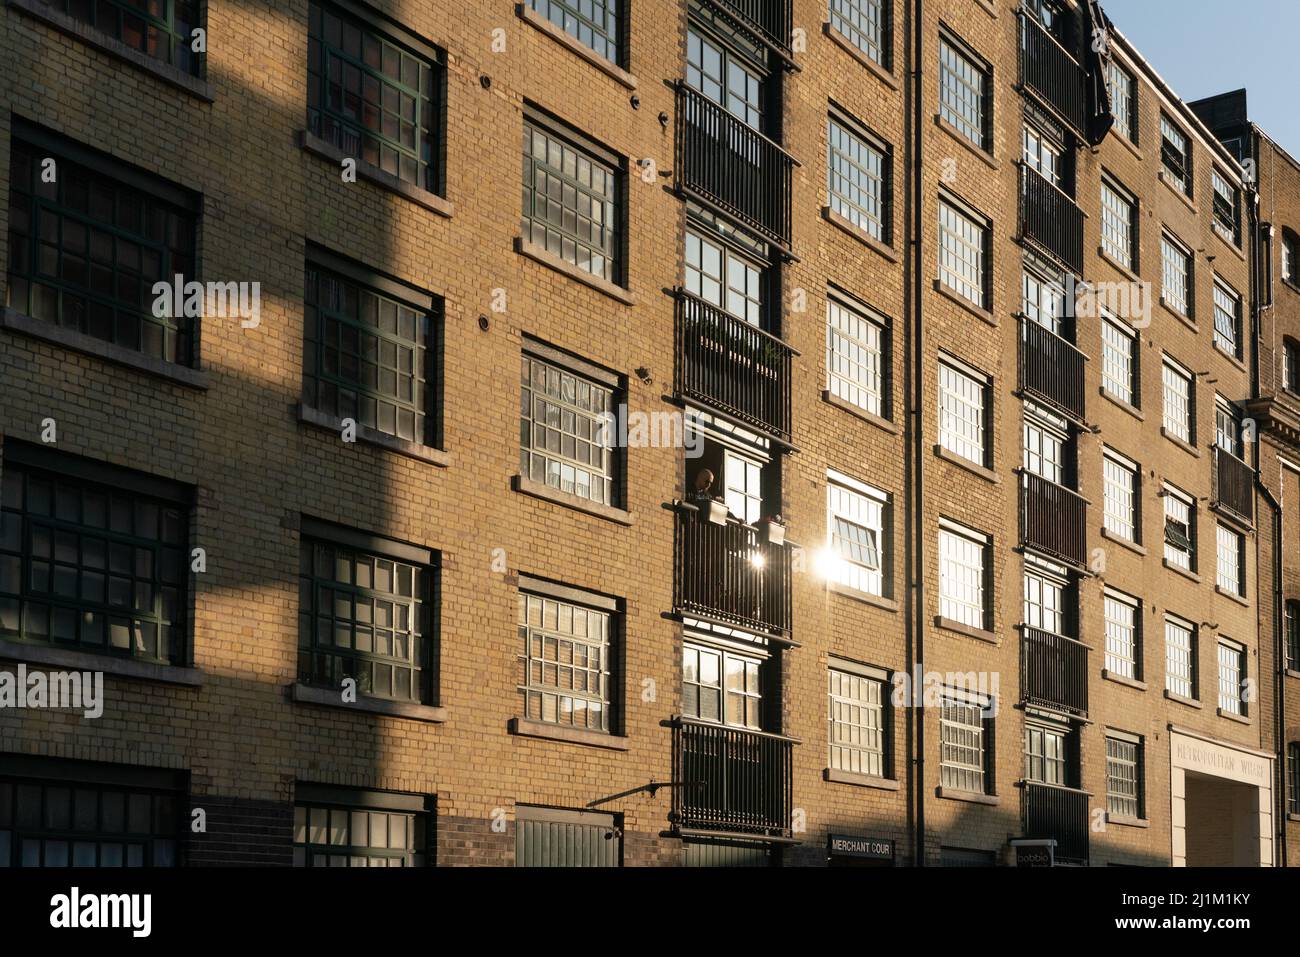 apartments from converted warehouses in Wapping, docklands, east london, england Stock Photo